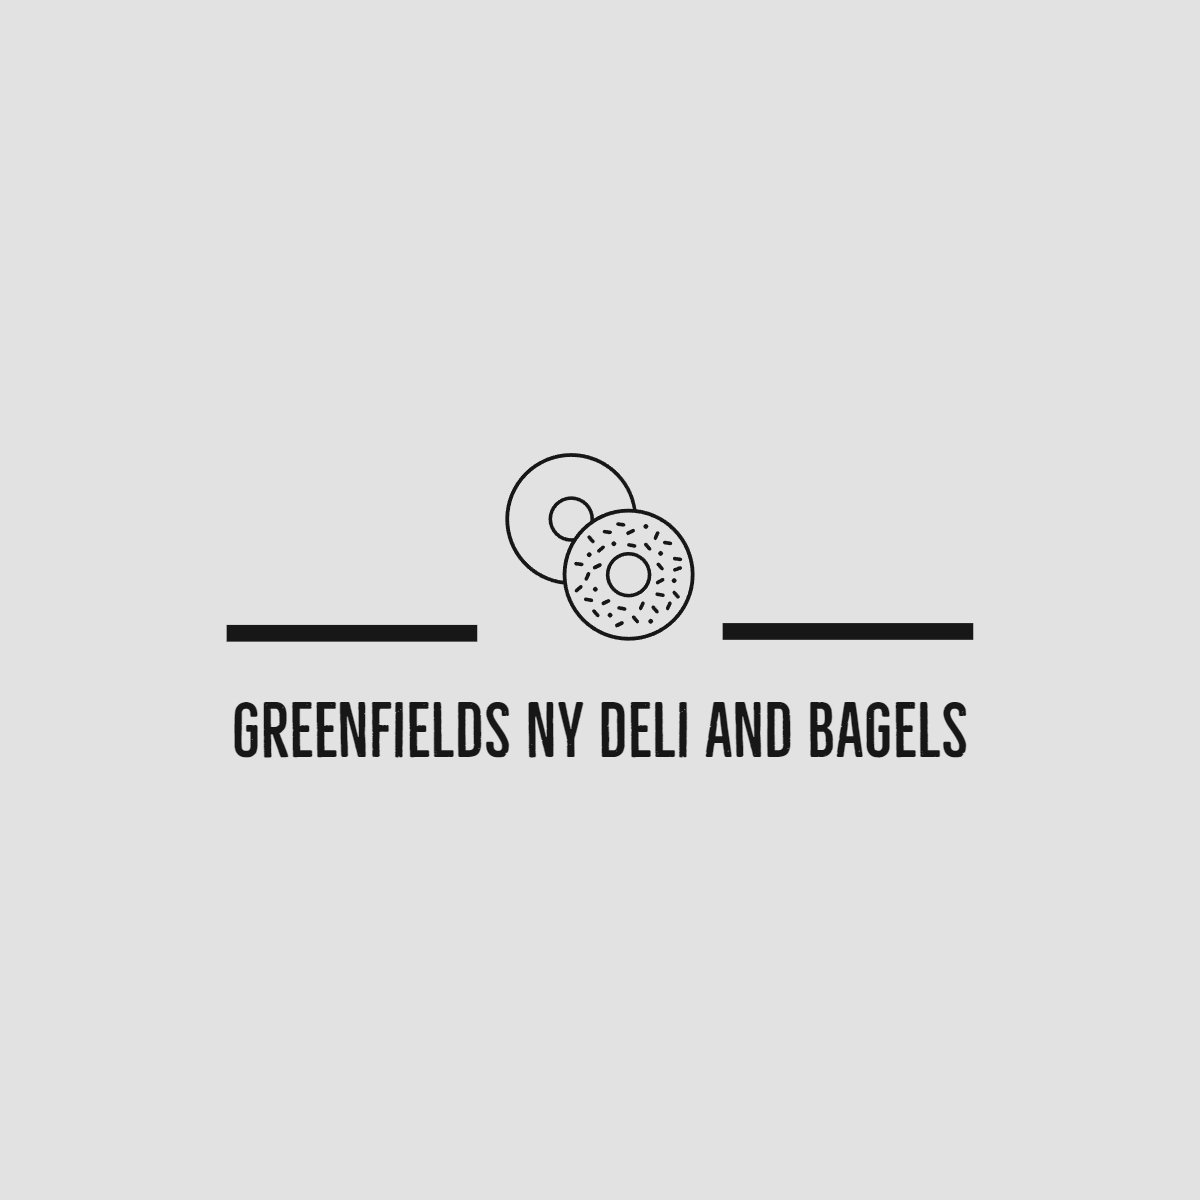 Greenfields NY Deli and Bagels